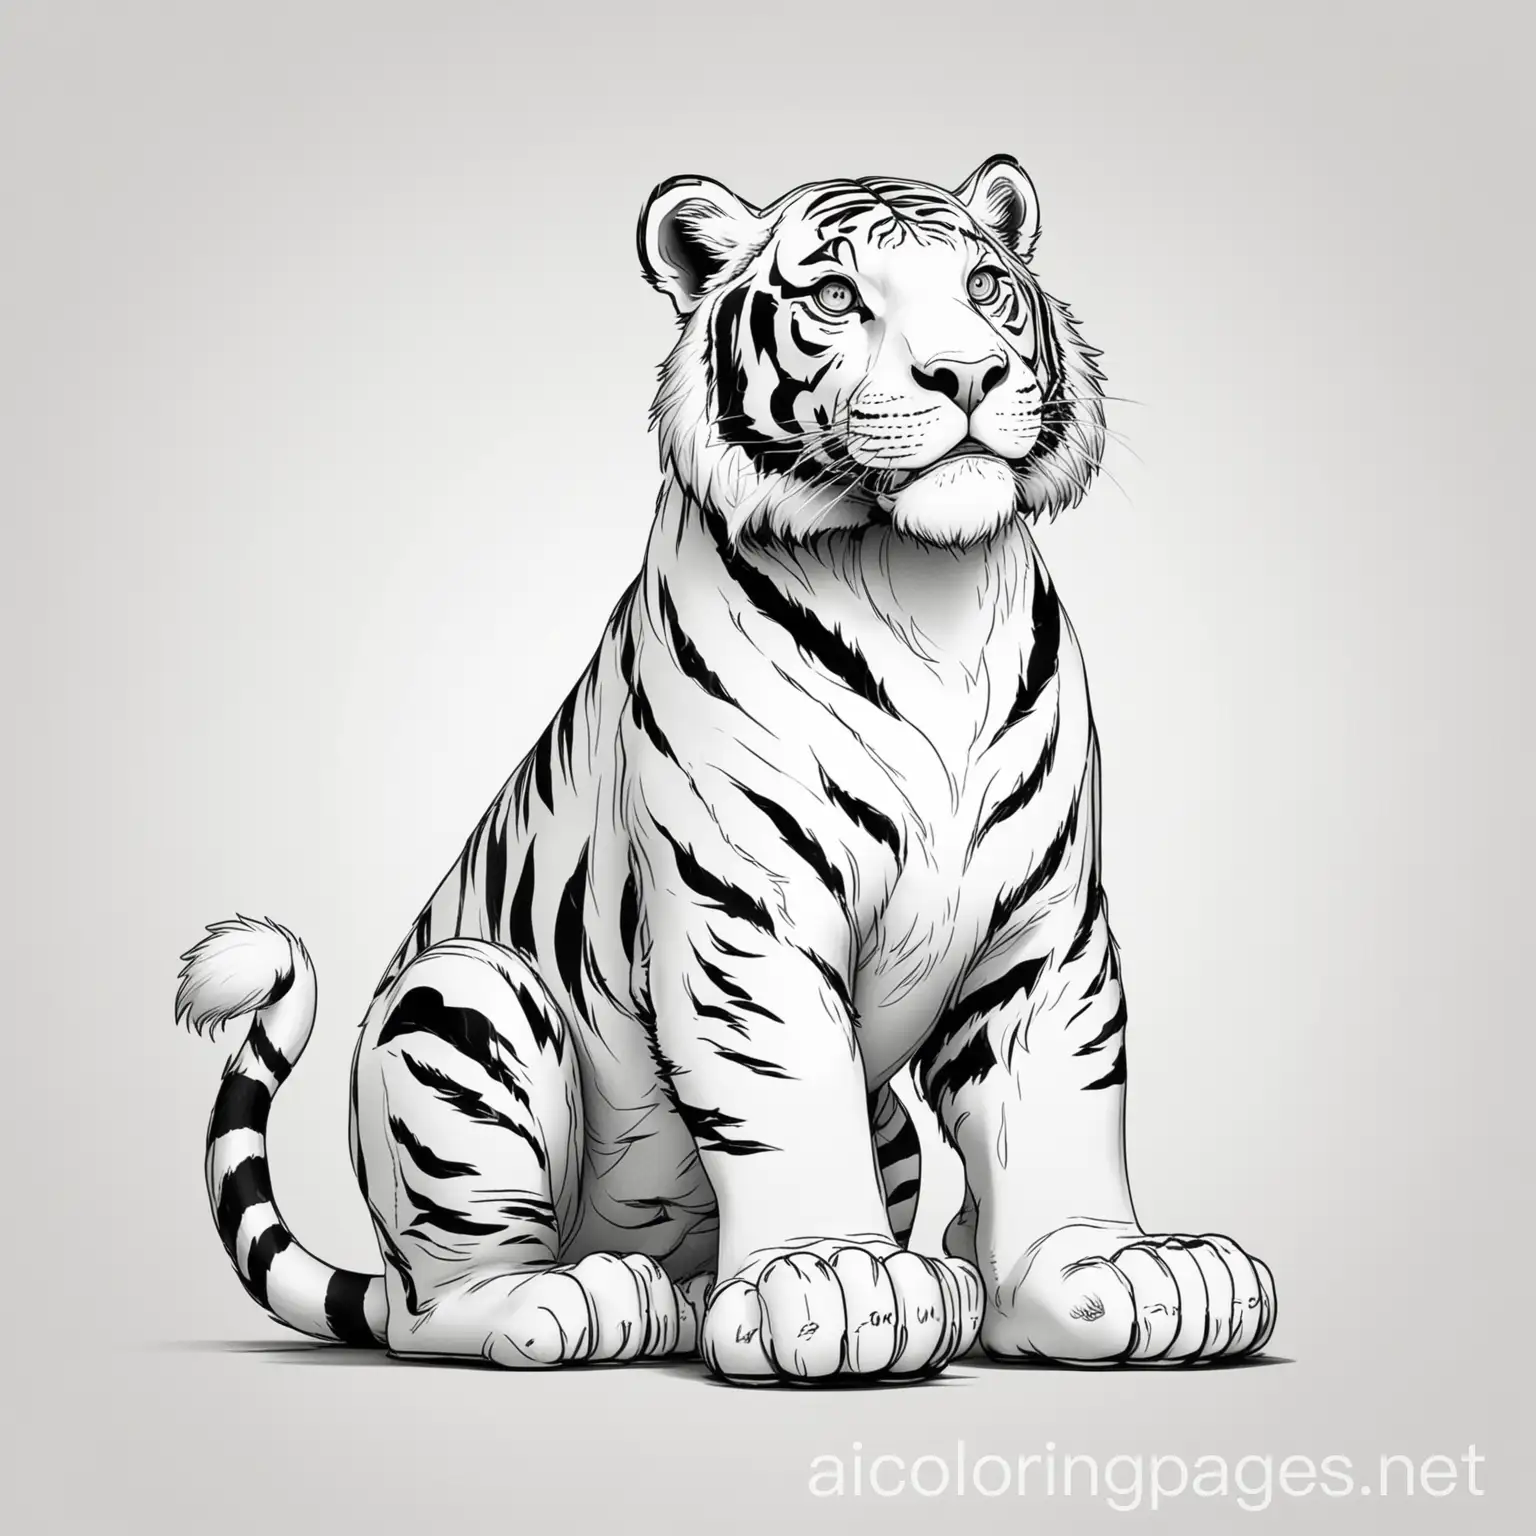 big cartoon tiger looking away two feet up coloring page black and white cartoon style, Coloring Page, black and white, line art, white background, Simplicity, Ample White Space. The background of the coloring page is plain white to make it easy for young children to color within the lines. The outlines of all the subjects are easy to distinguish, making it simple for kids to color without too much difficulty